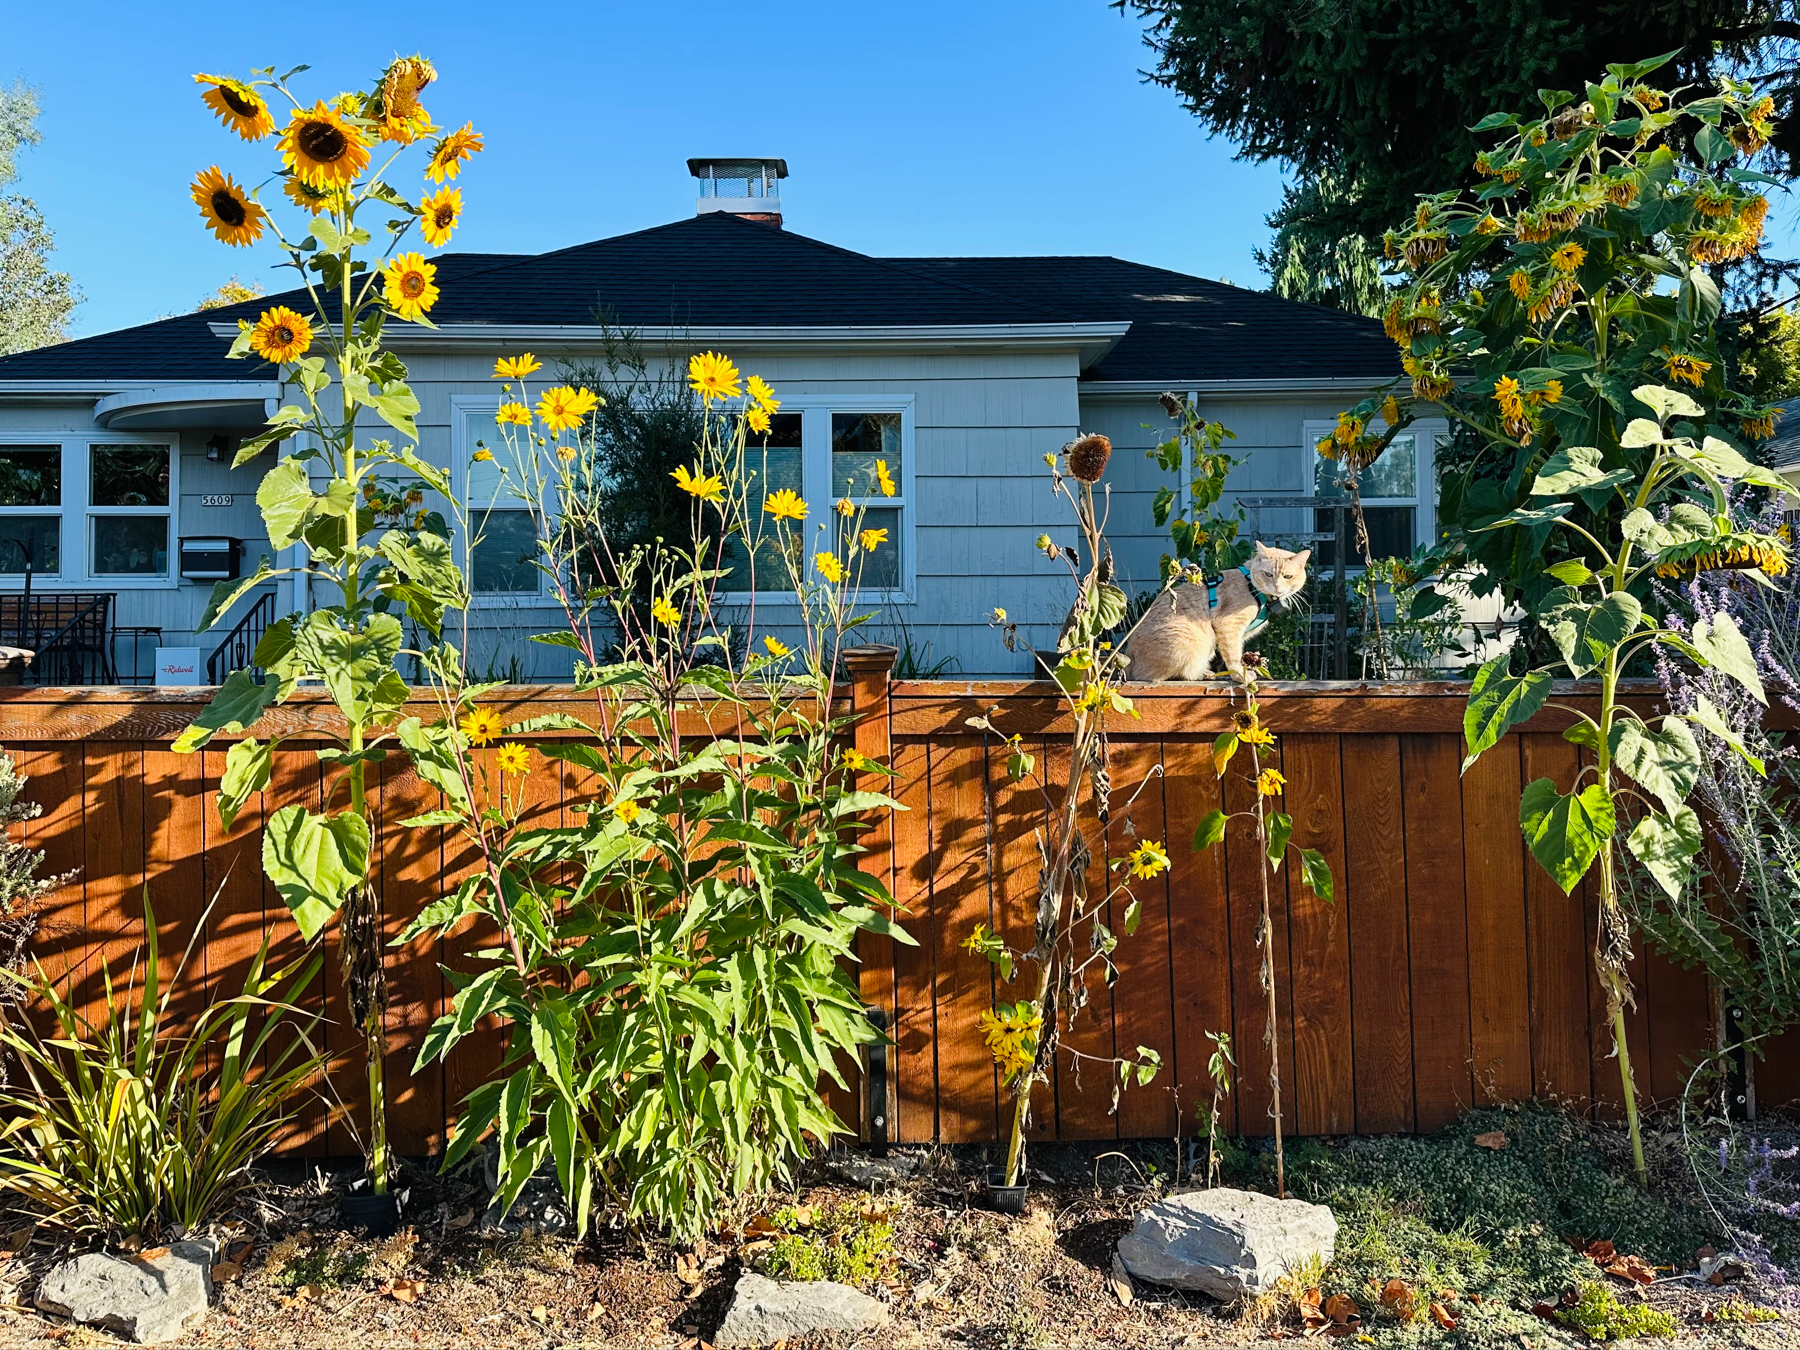 A cat sits on a short fence with a house in the background and blue sky above. There are tall sunflowers next to the cat.